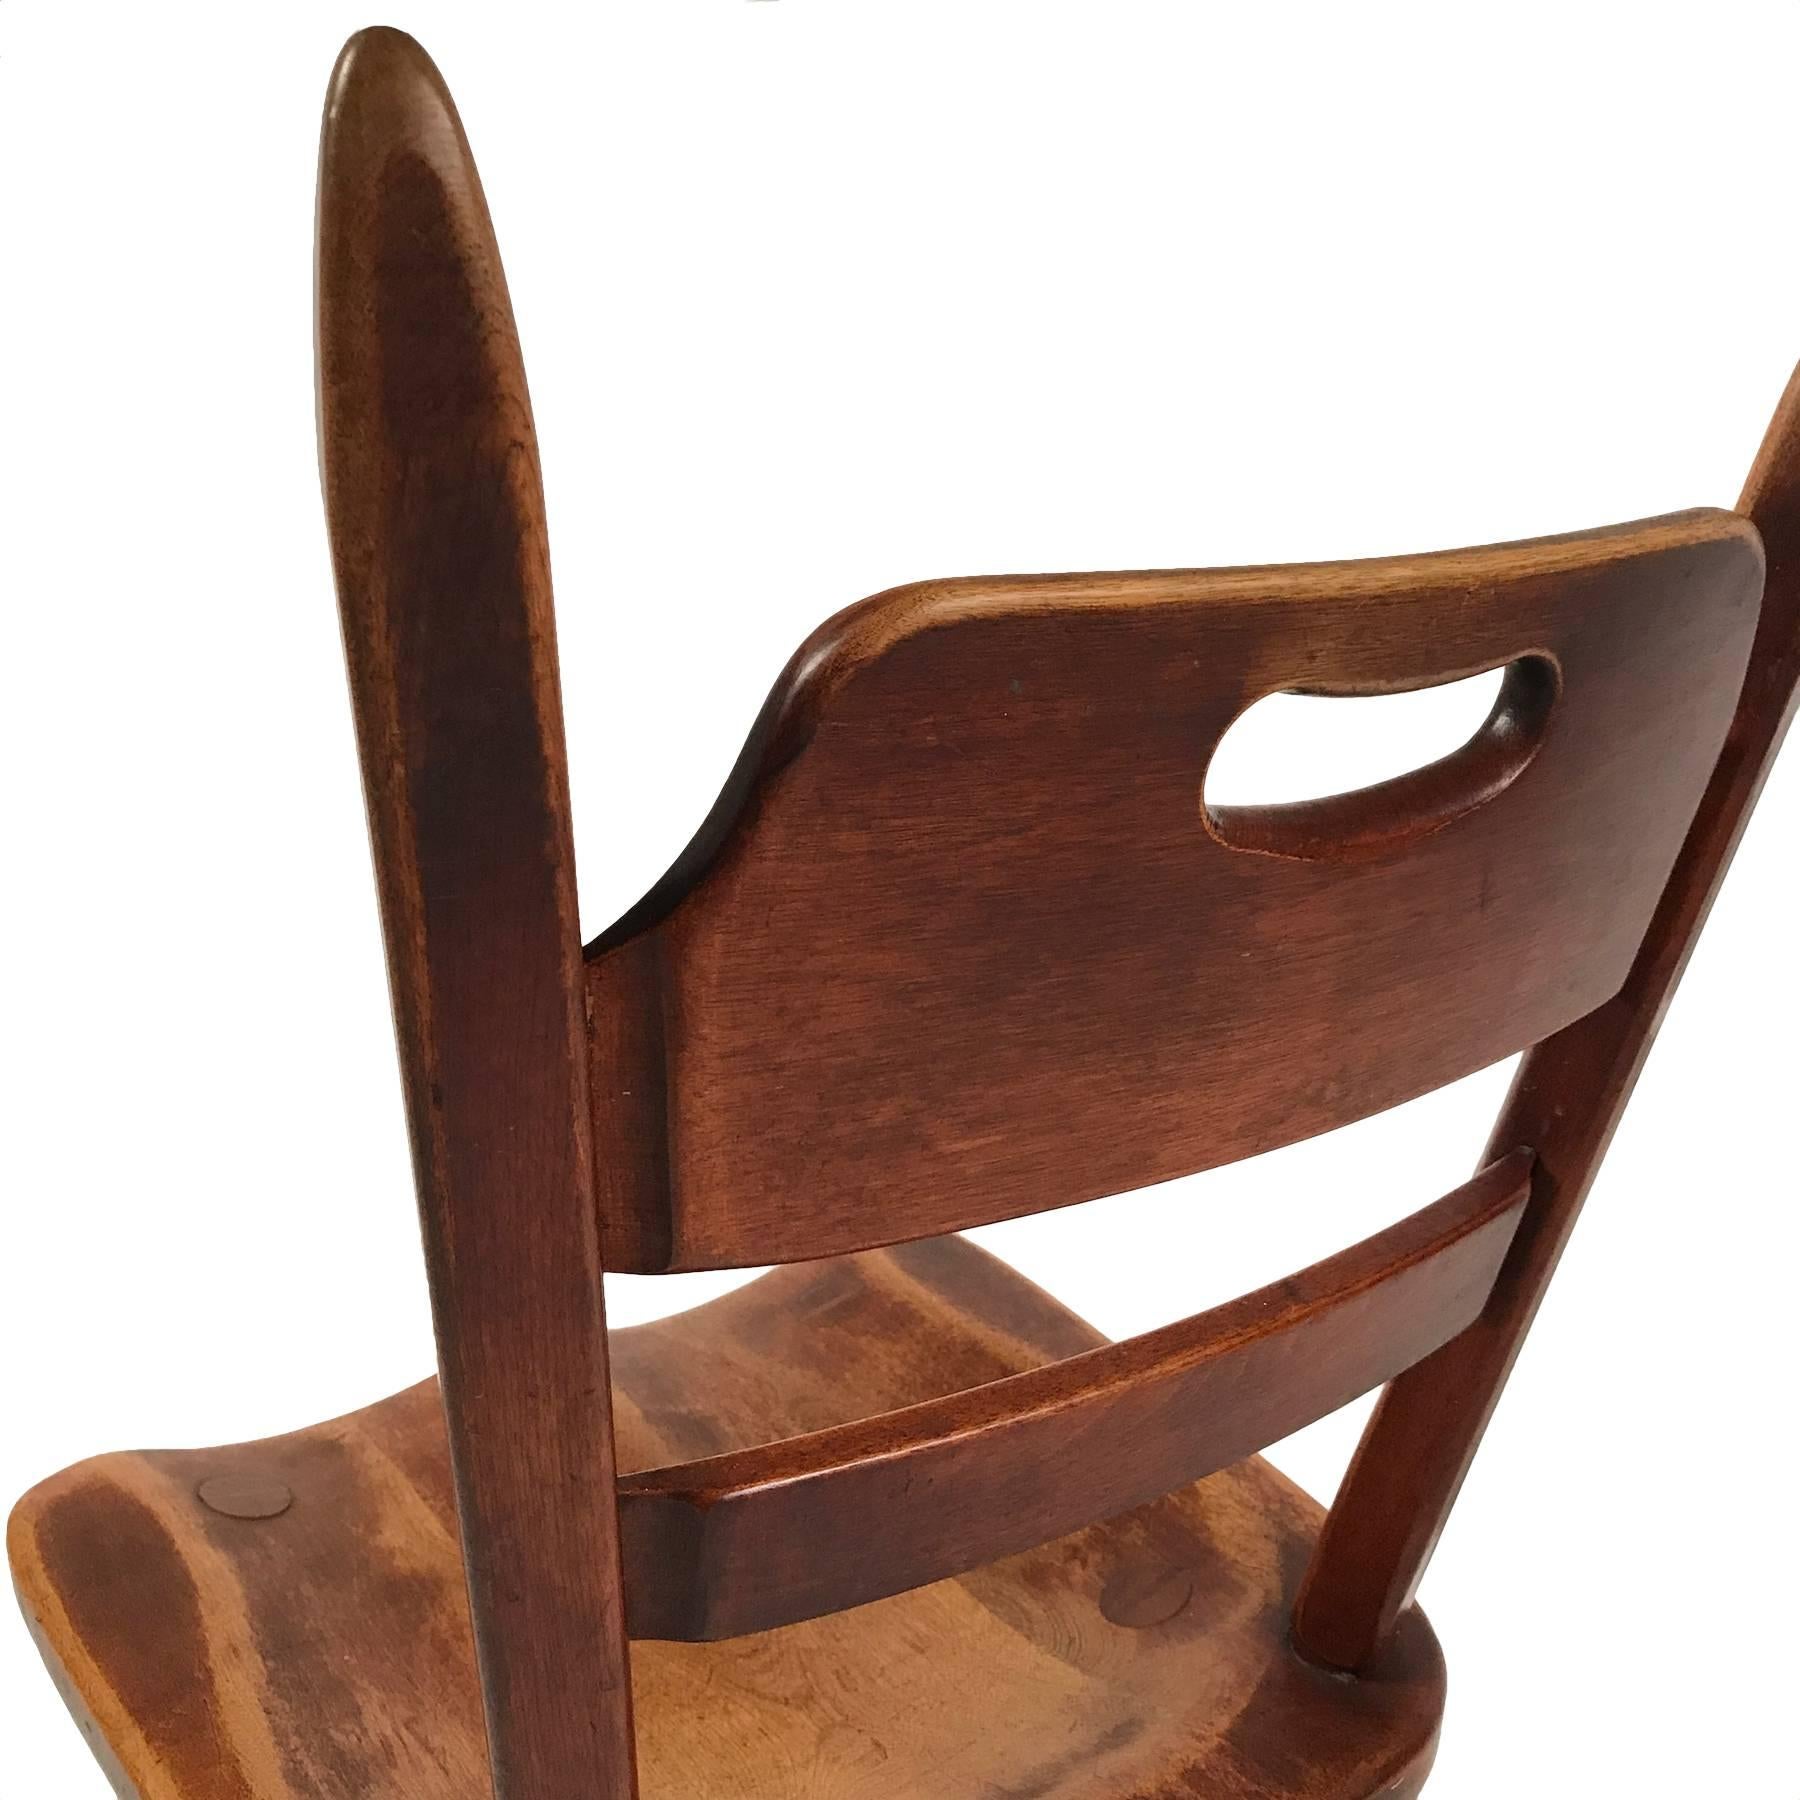 Great piece of Americana with a modern twist. Stunning, sleek, yet sturdy. Perfect chairs for the 